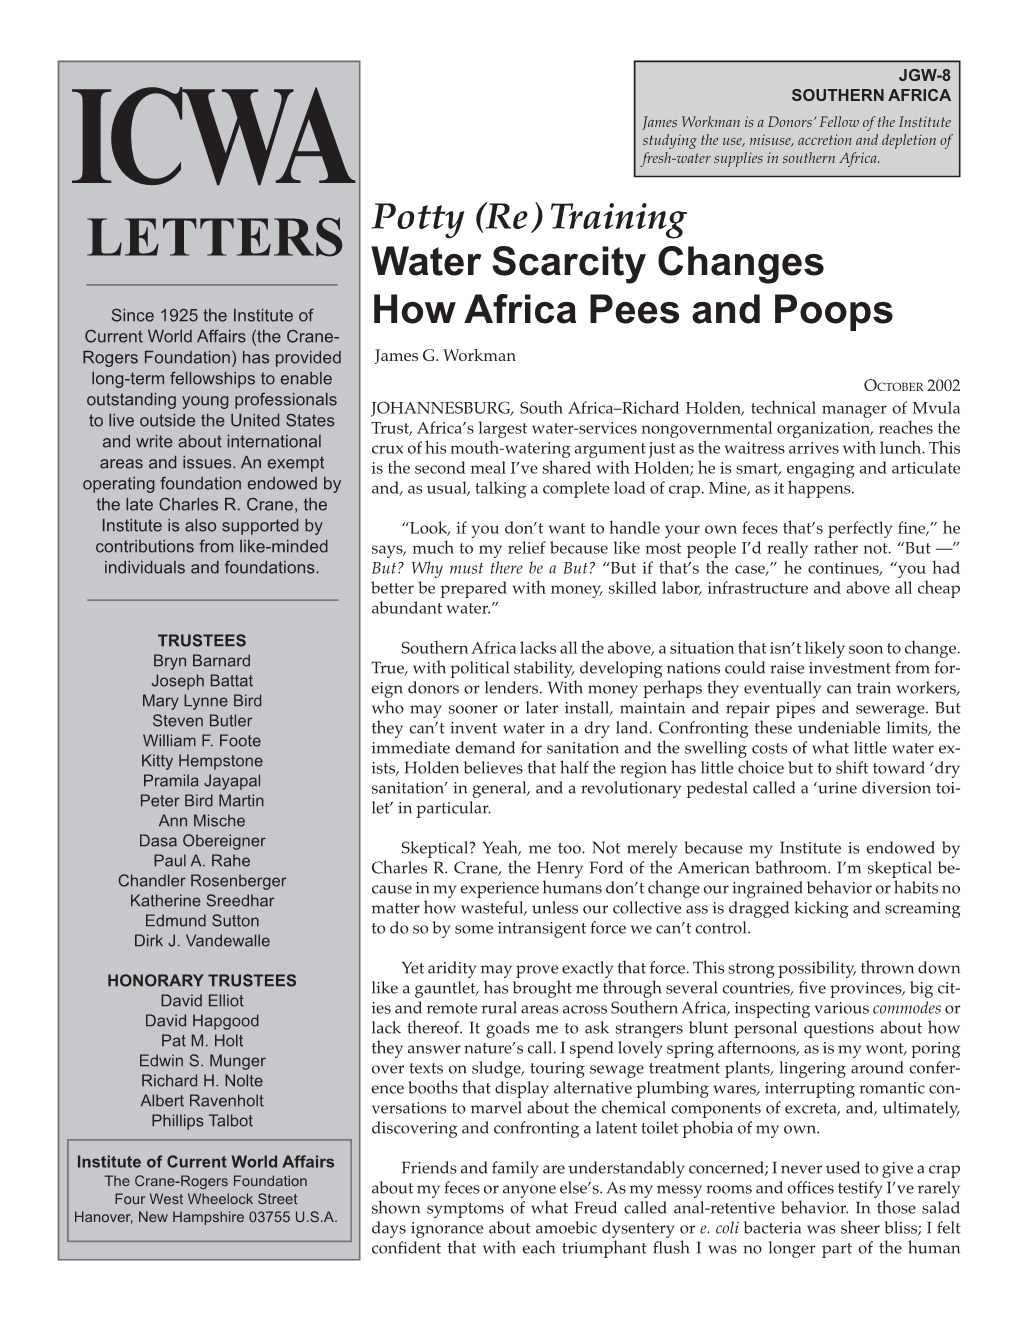 Potty (Re) Training LETTERS Water Scarcity Changes